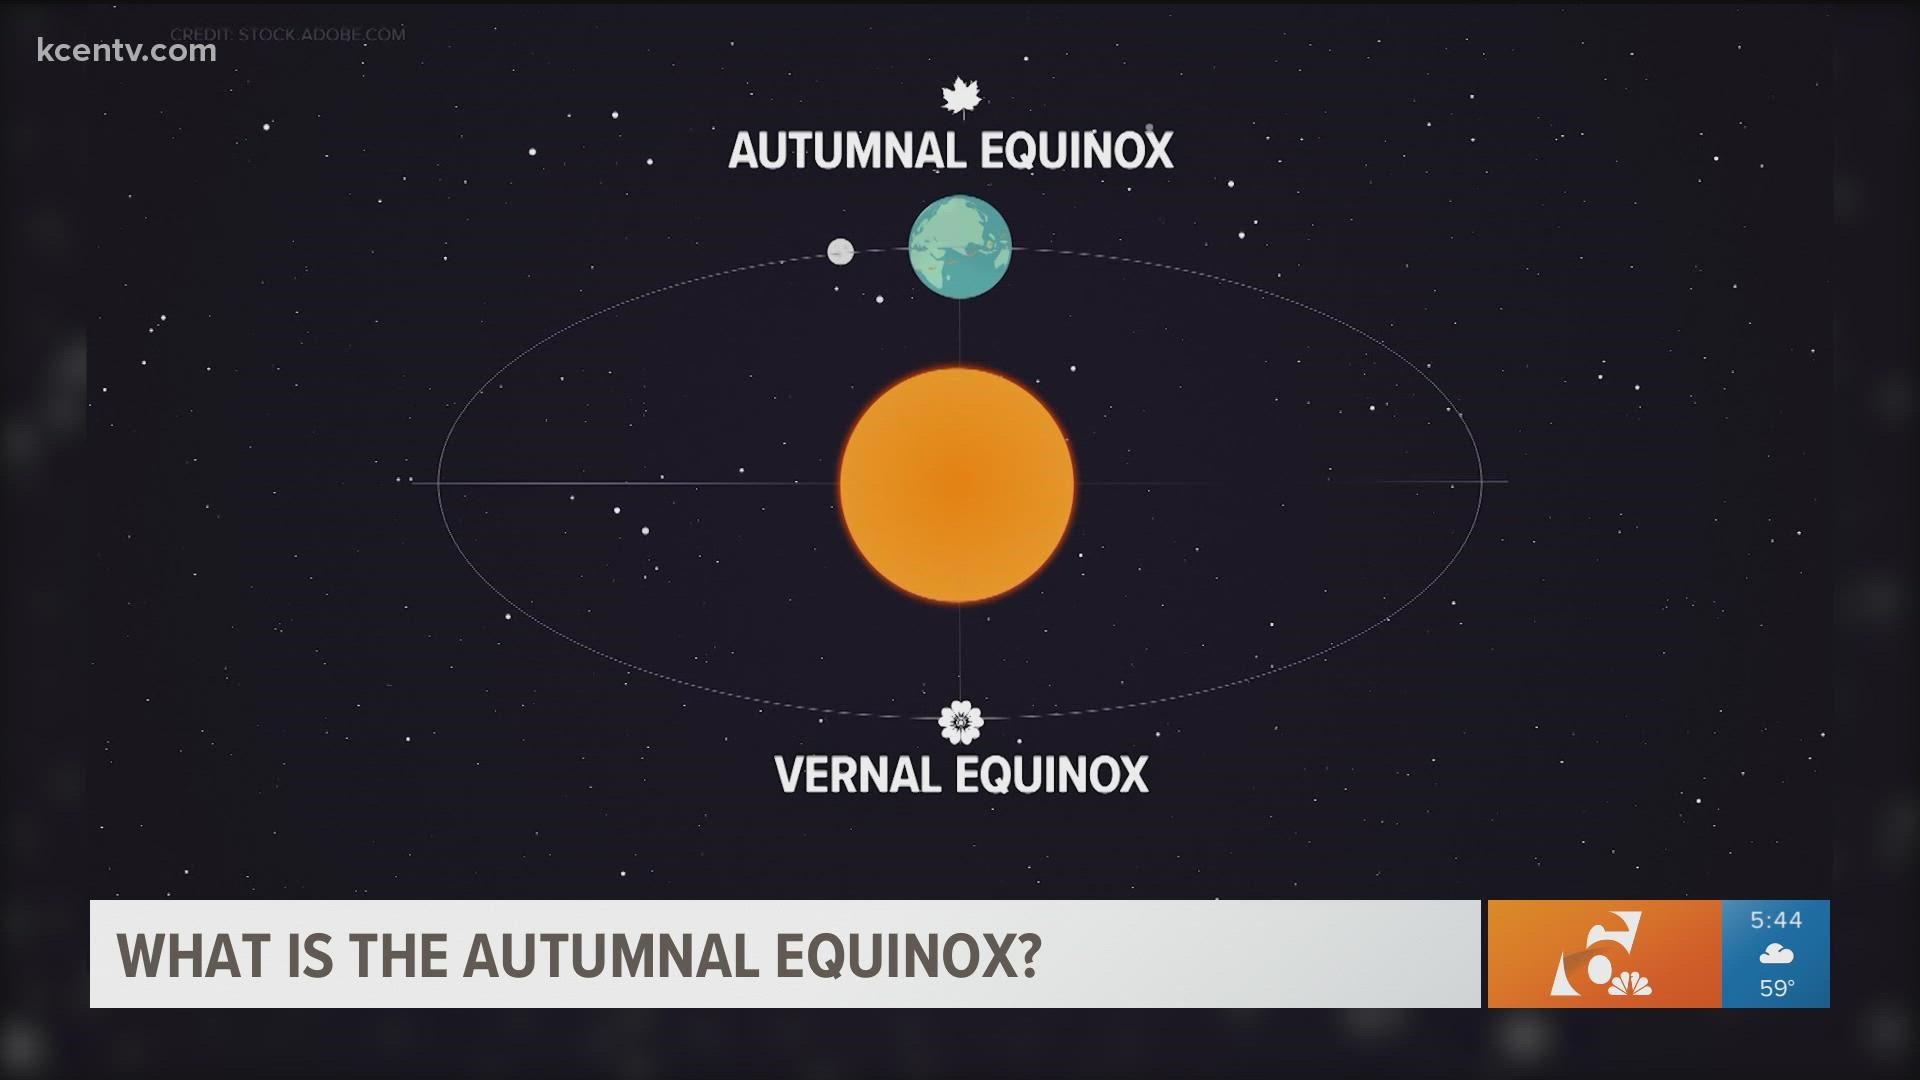 6News breaks down the what the autumnal equinox is on the first day of fall!